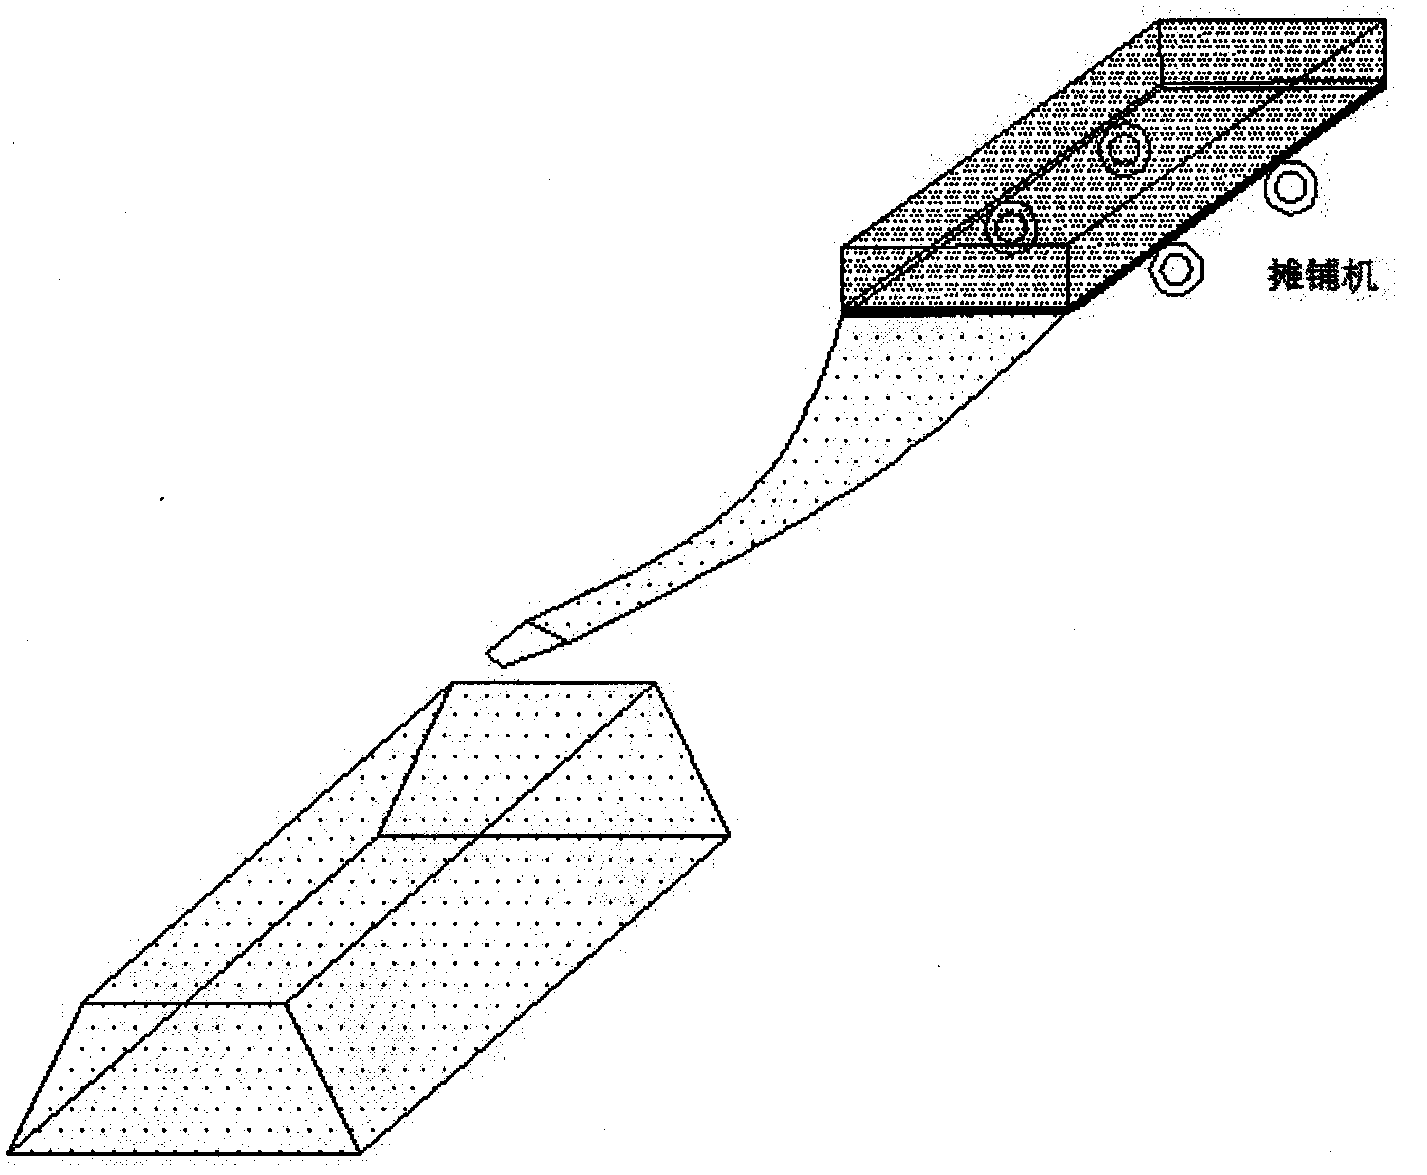 Method for improving heavy haul railway subgrade by use of fiber-reinforced stabilized soil